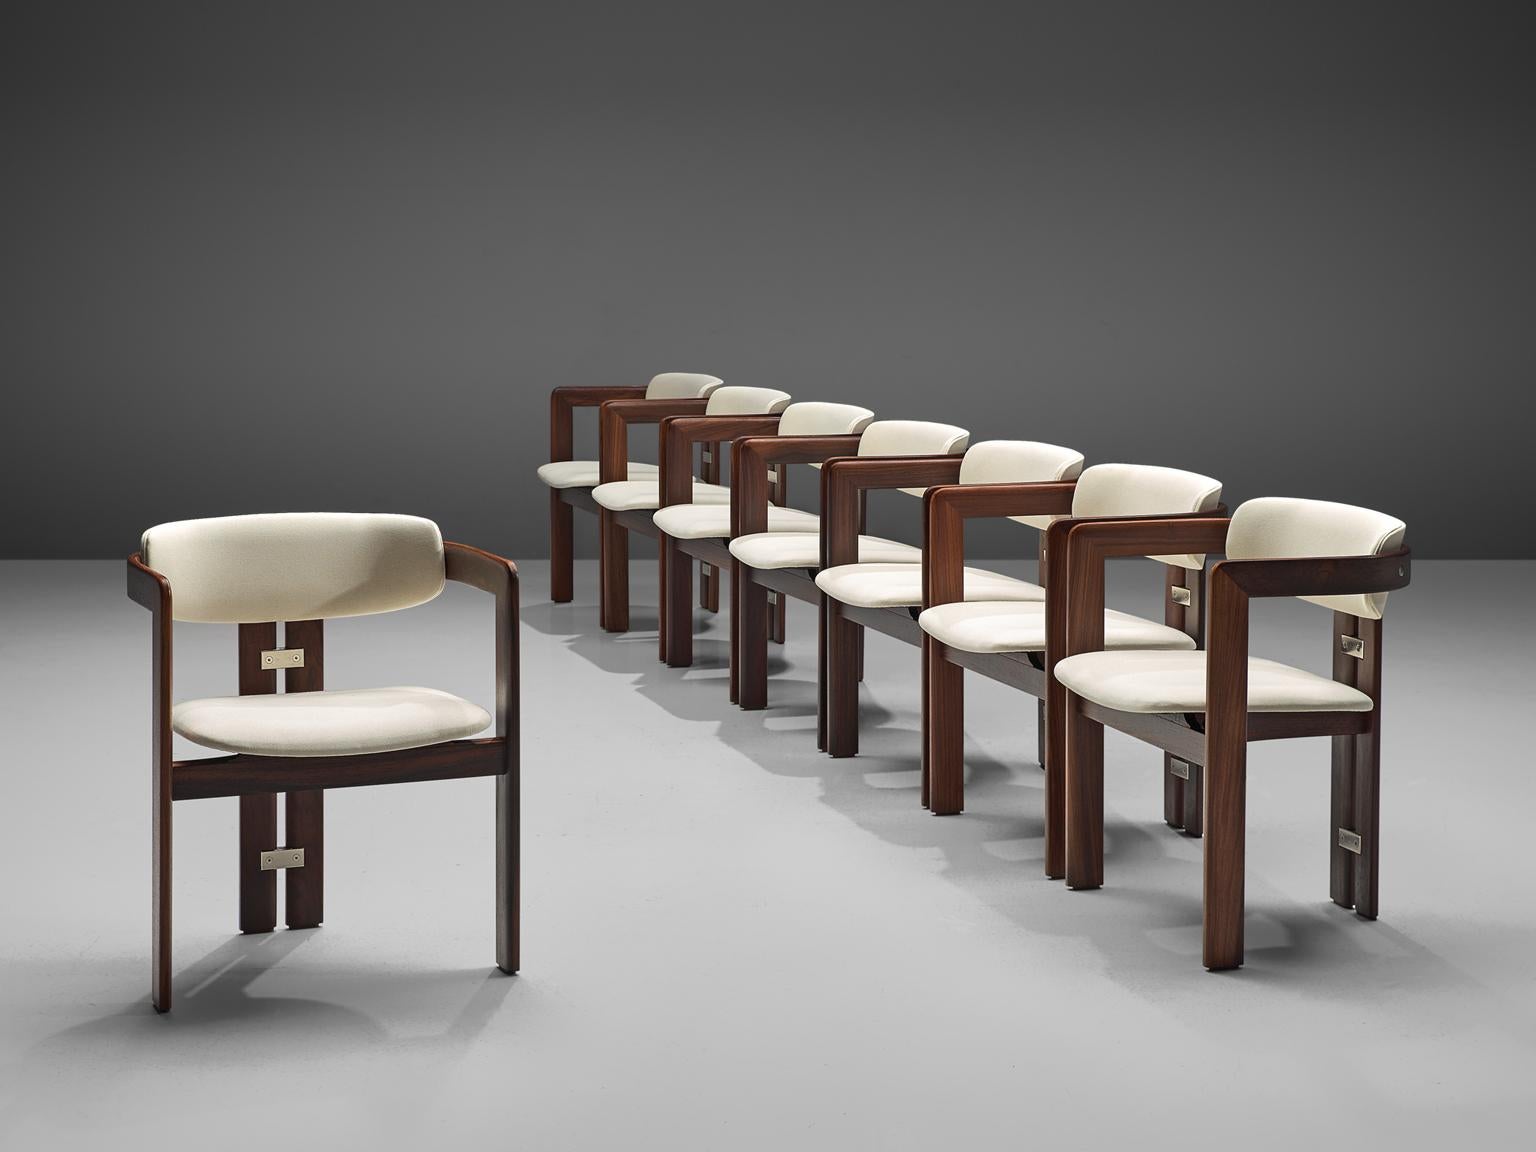 Augusto Savini for Pozzi, set of eight 'Pamplona' dining room chairs, to be reupholstered, glossed wood and metal, Italy, 1965. 

Set of eight armchairs in dark glossed rosewood and white fabric upholstery. The chairs have a unique and